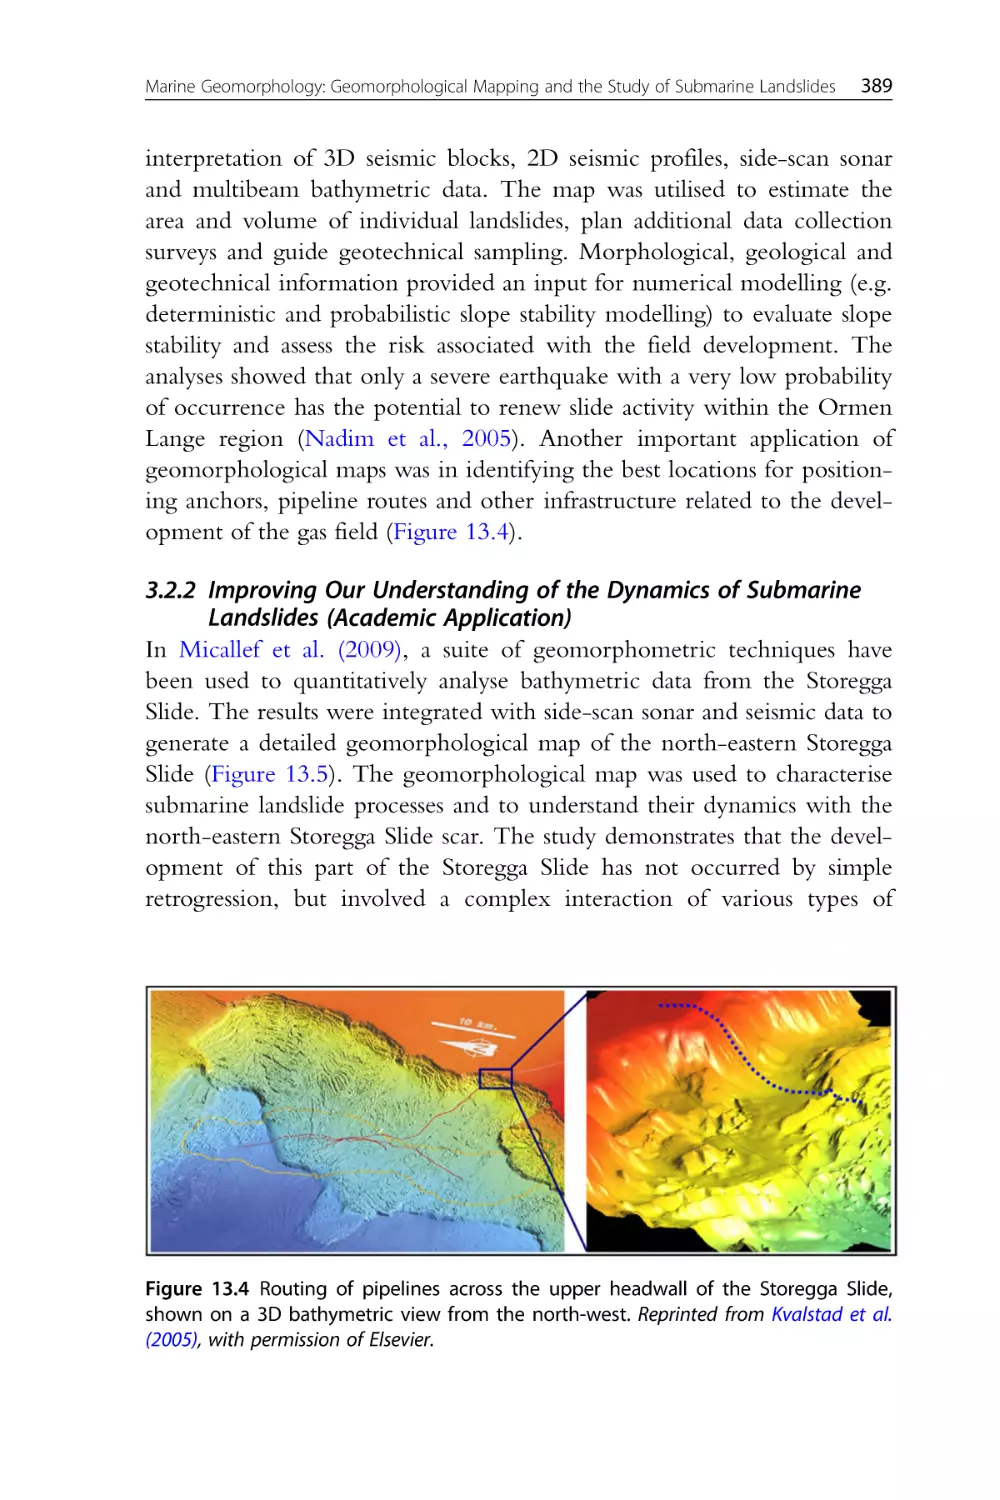 3.2.2 Improving Our Understanding of the Dynamics of Submarine Landslides (Academic Application)